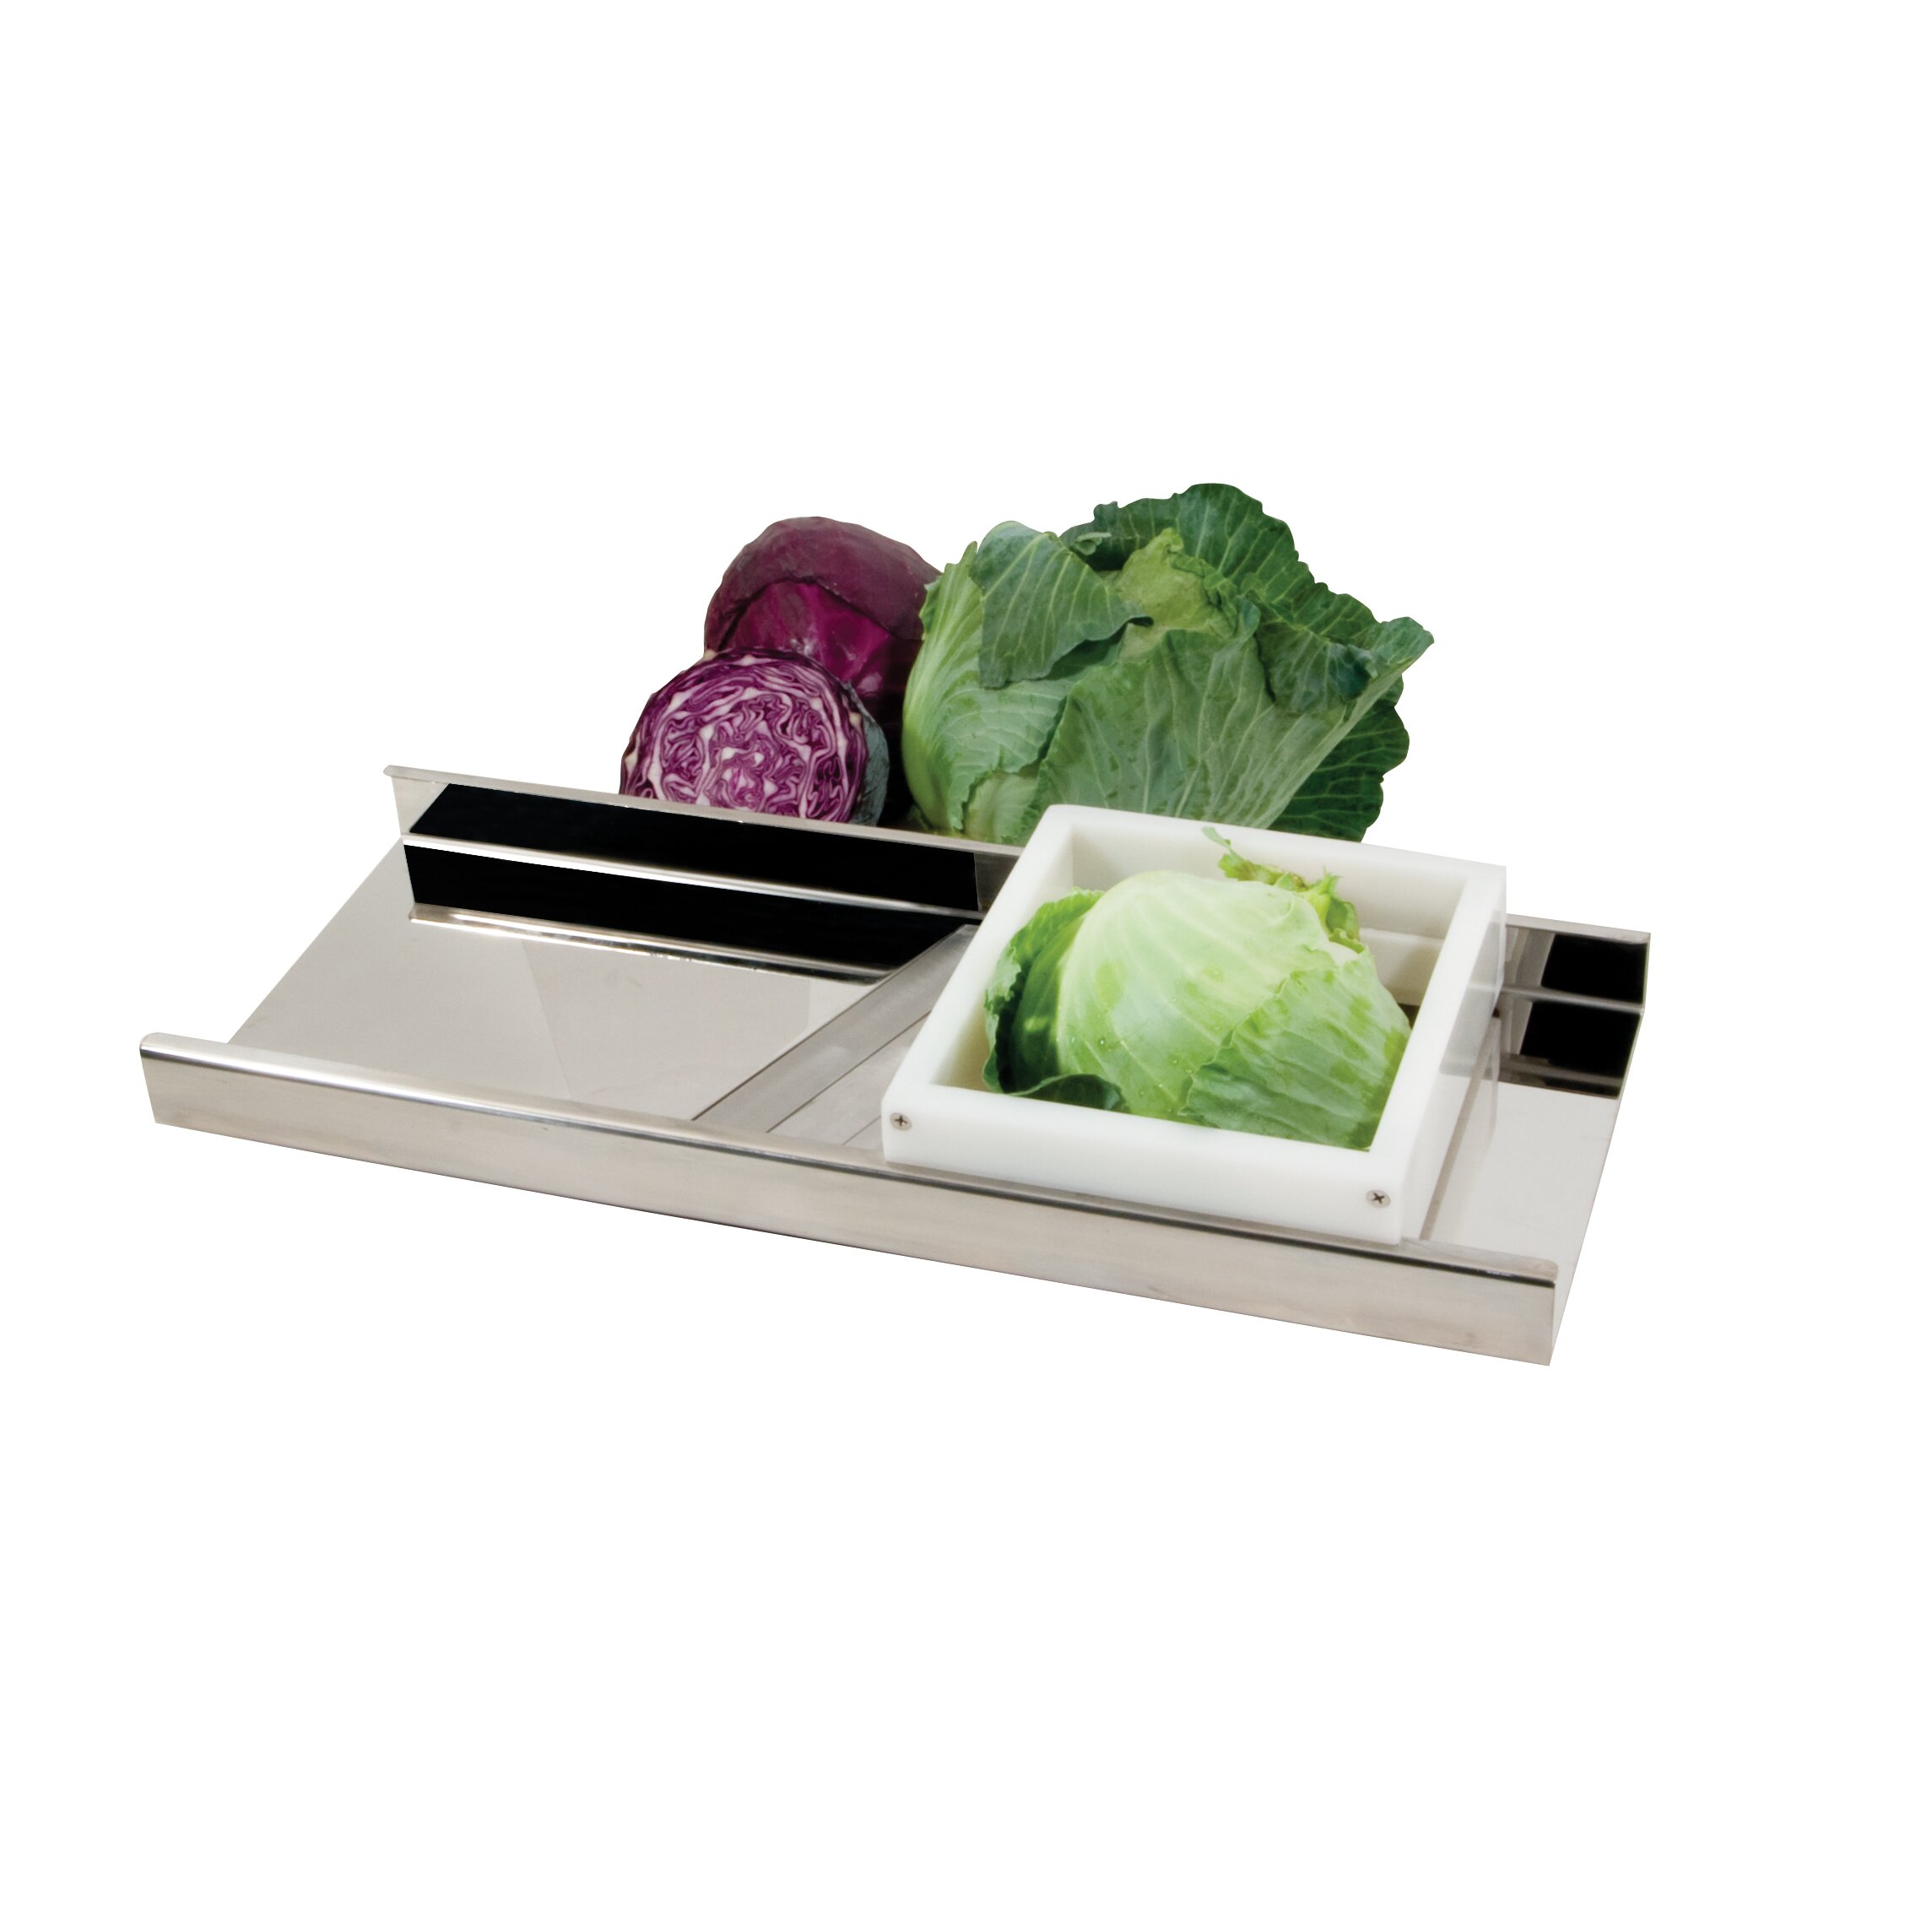 How does an electric cabbage shredder work?